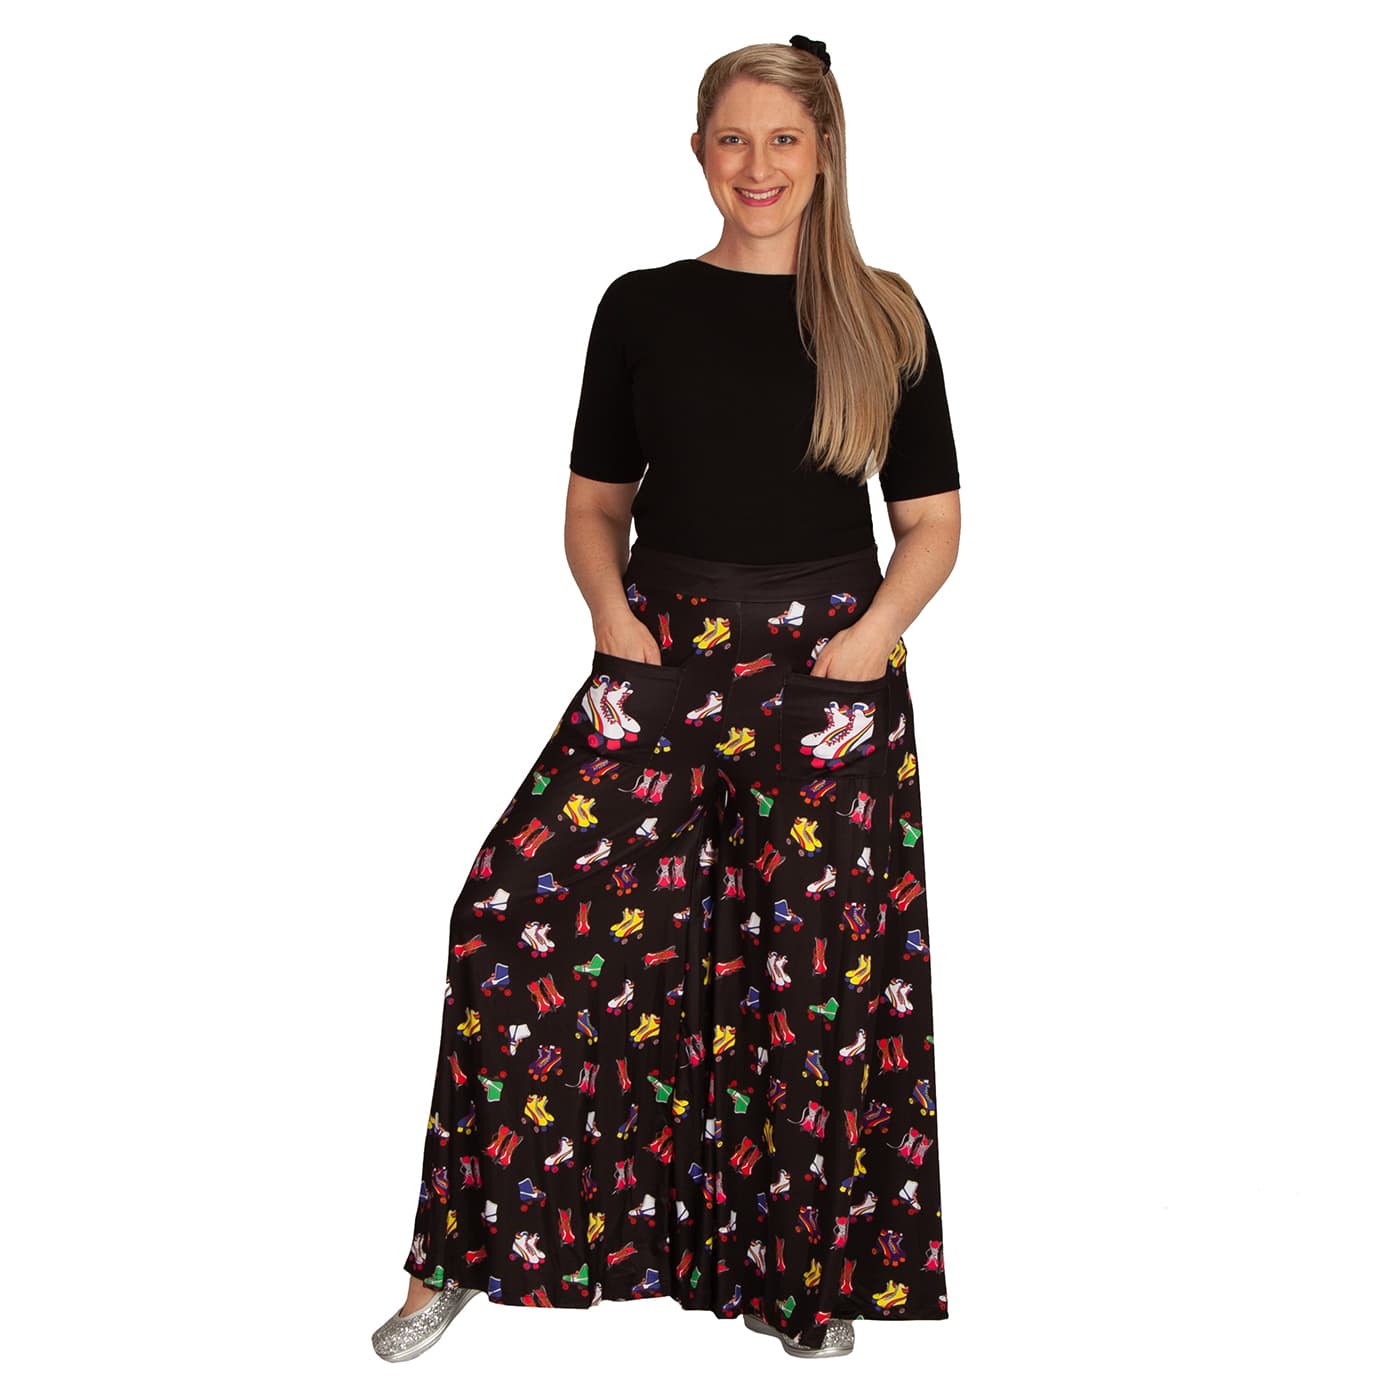 Retro Skates Wide Leg Pants by RainbowsAndFairies.com.au (Roller Skates - Roller Derby - Pants With Pockets - Pallzao Pants - Flares - Bell Bottoms) - SKU: CL_WIDEL_RETRO_ORG - Pic-02